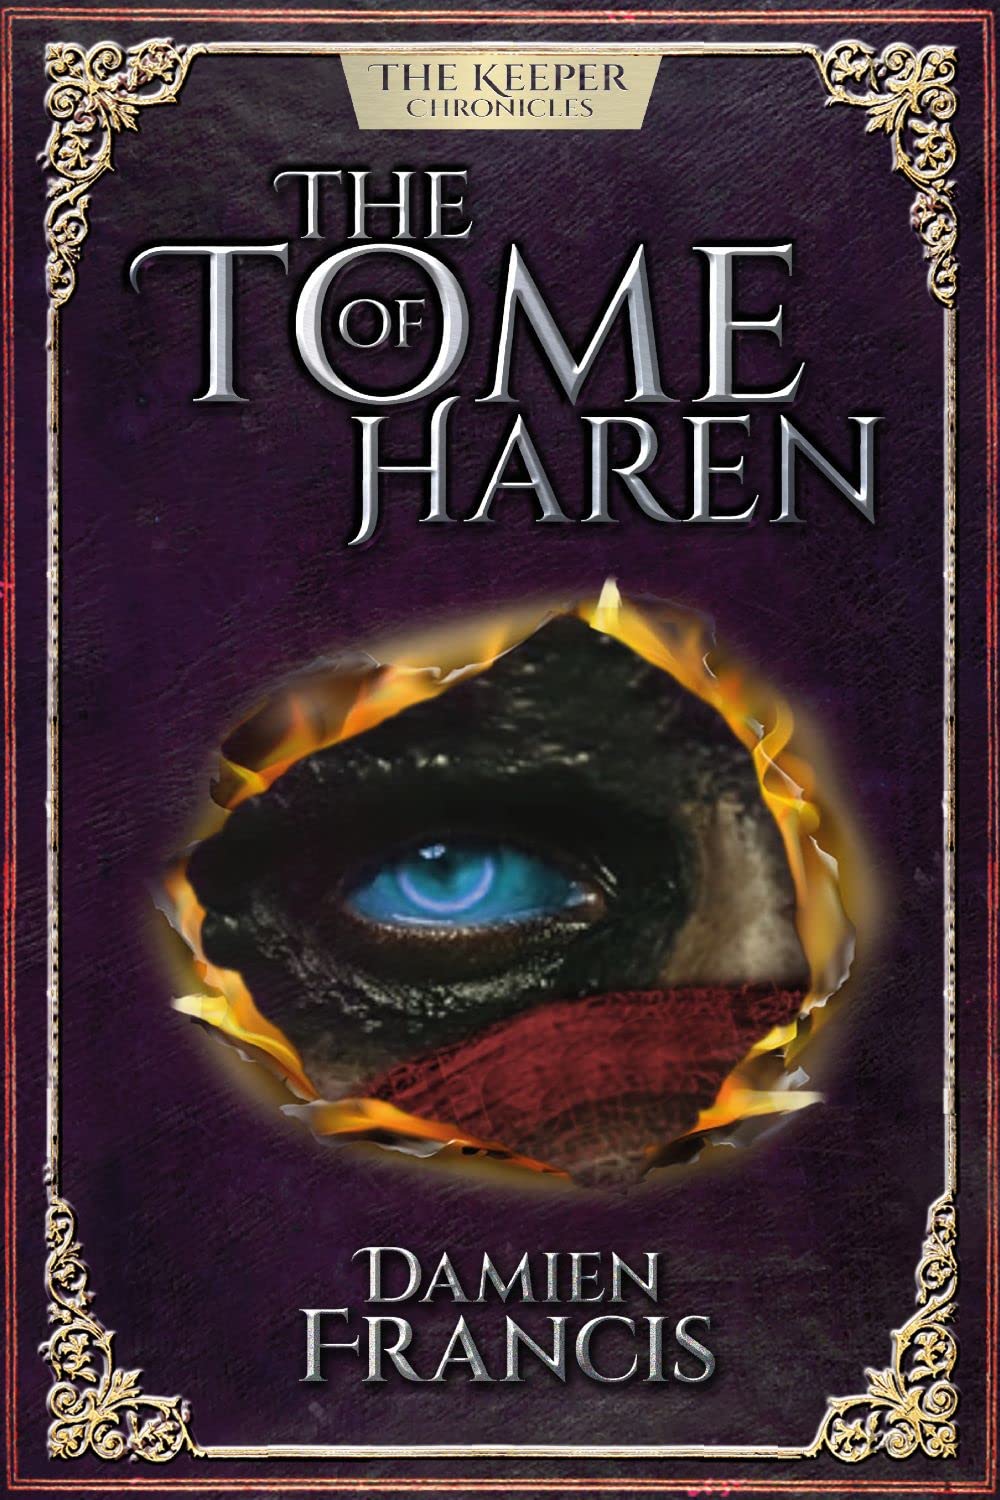 The Tome of Haren